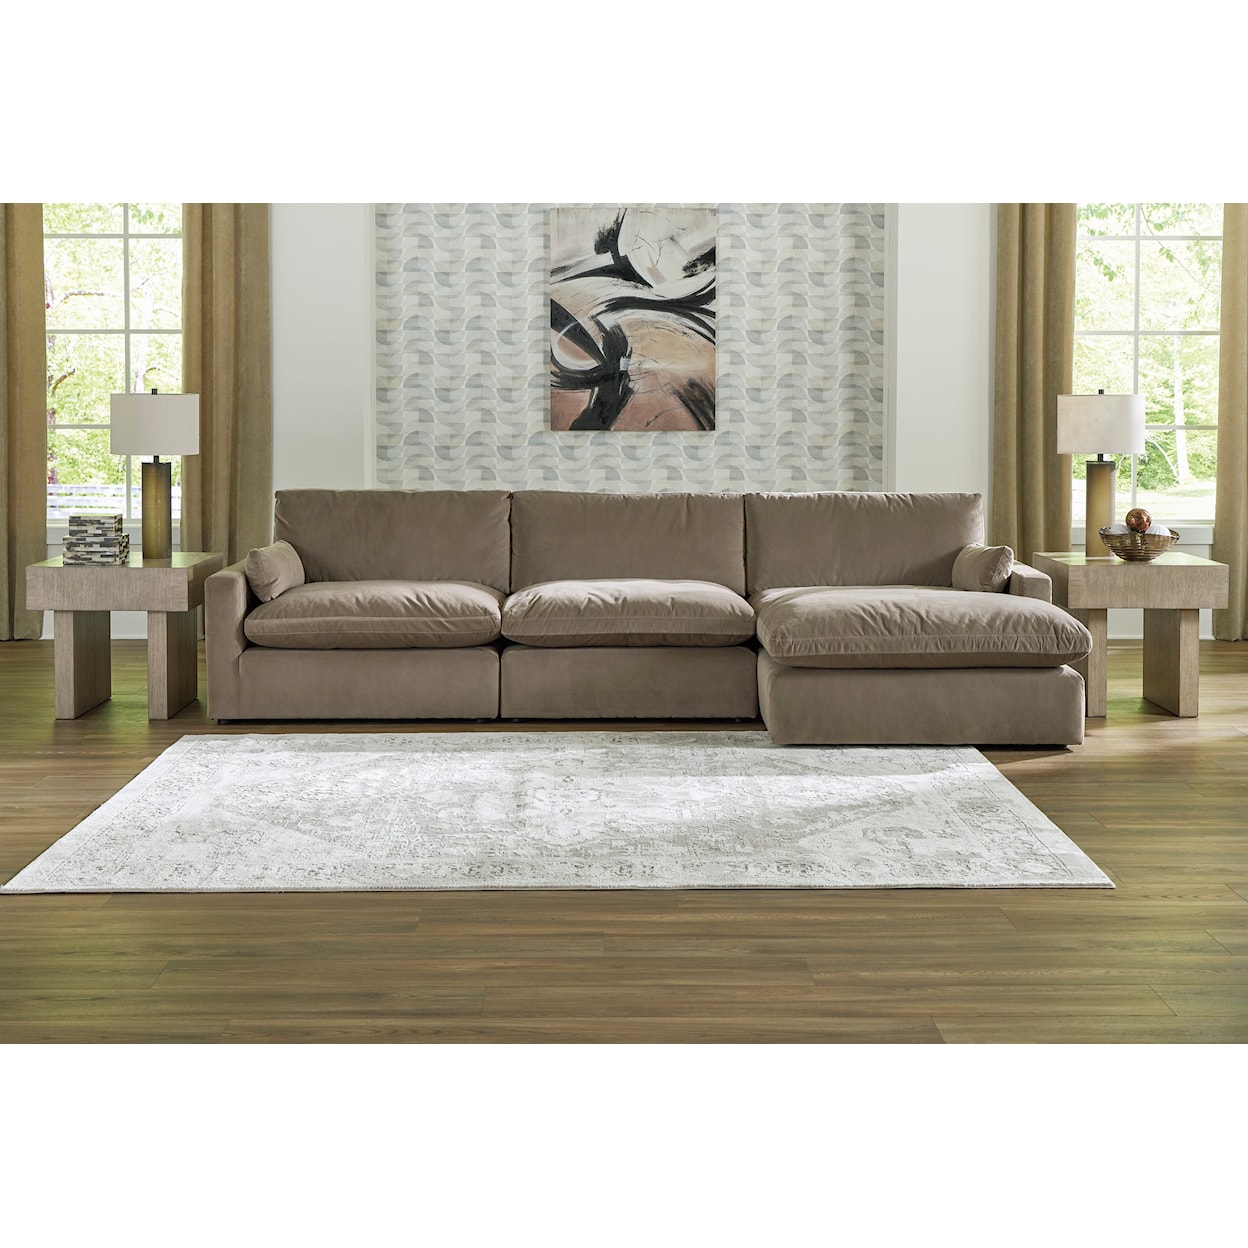 Michael Alan Select Sophie 3-Piece Sectional Sofa Chaise